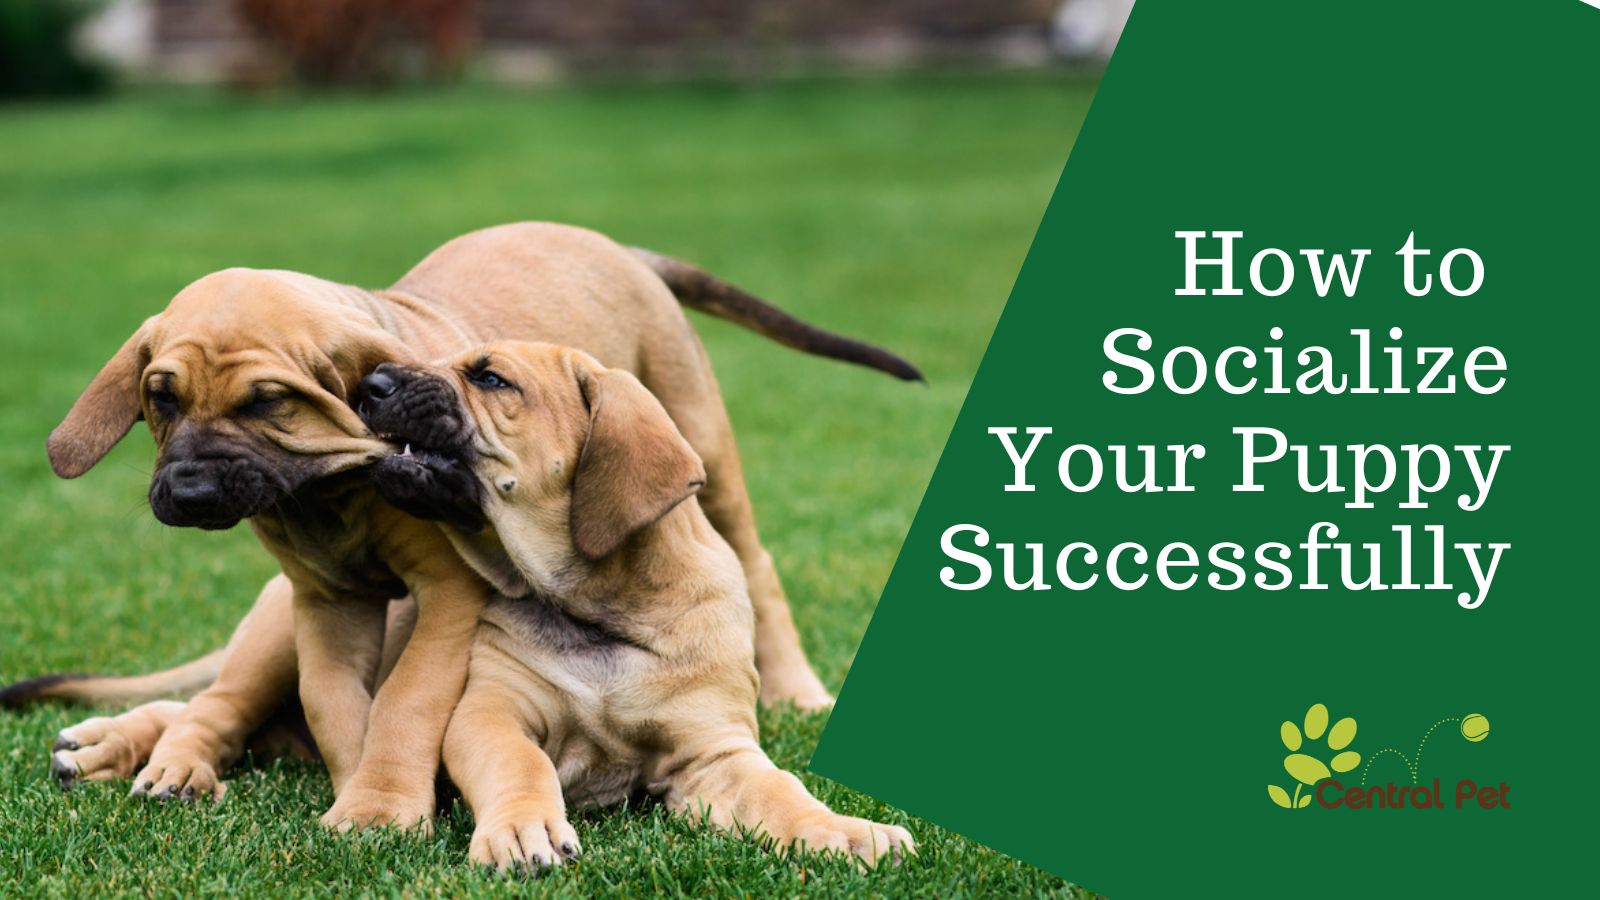 How to Successfully Socialize Your Puppy